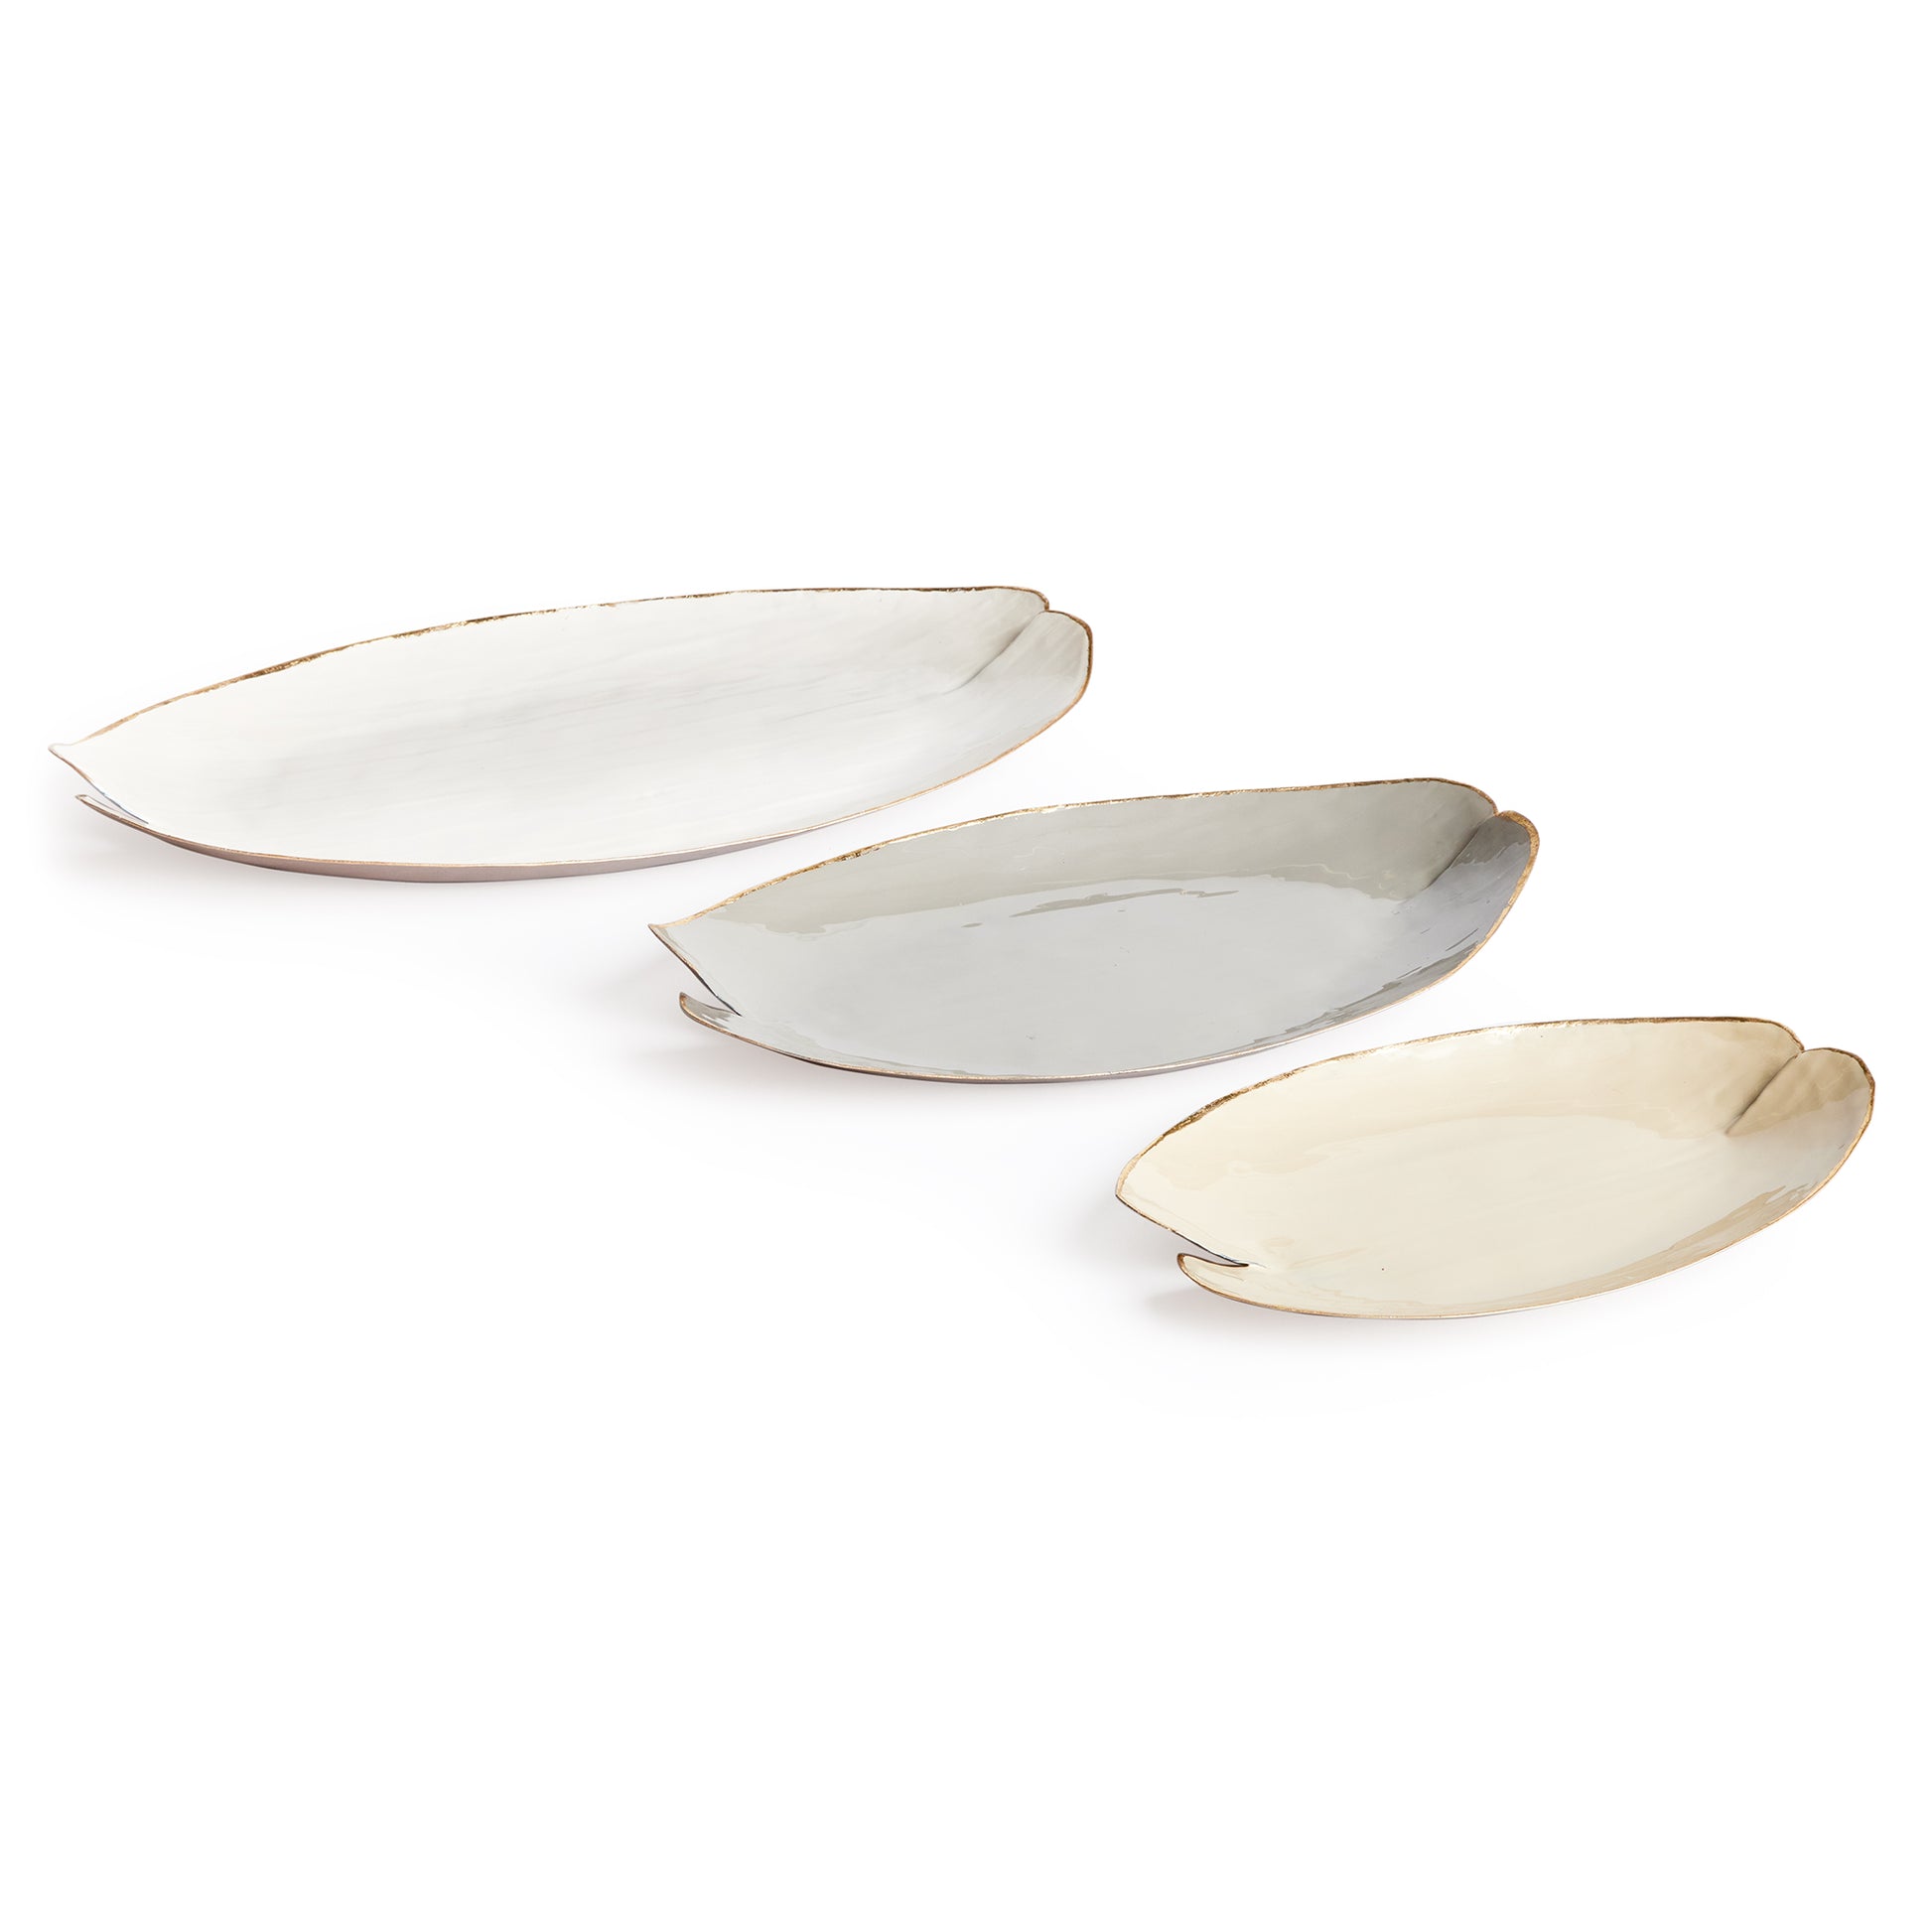 This charming set of hand-painted decorative trays are inspired by lily pads. With a gold edge detail, and coordinating neutral hues, they add a pop of muted character to kitchen island, side table or ottoman.